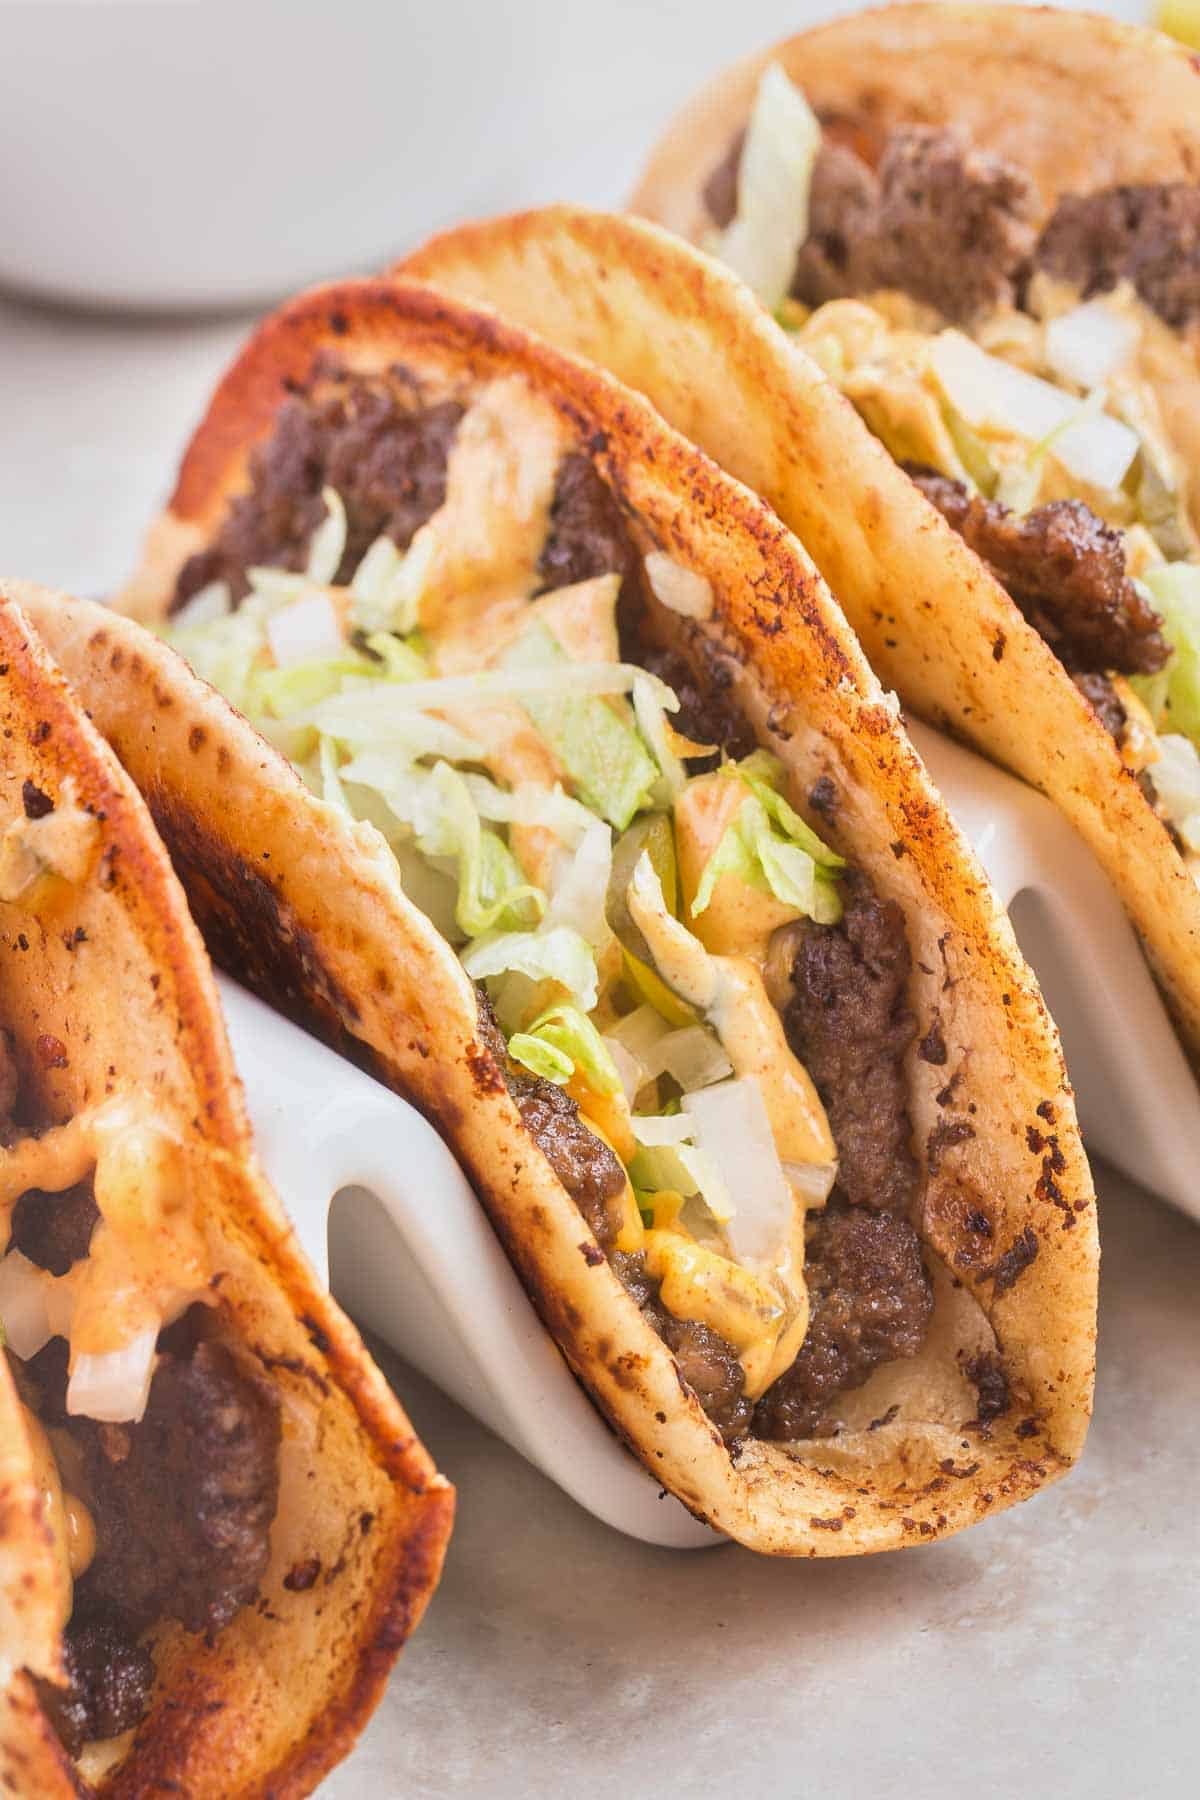 Smash Burger Tacos are a delightful fusion of two classic foods made with flour tortillas topped with ground beef patties, cheese, onions, pickles, shredded lettuce and homemade copycat Big Mac sauce.